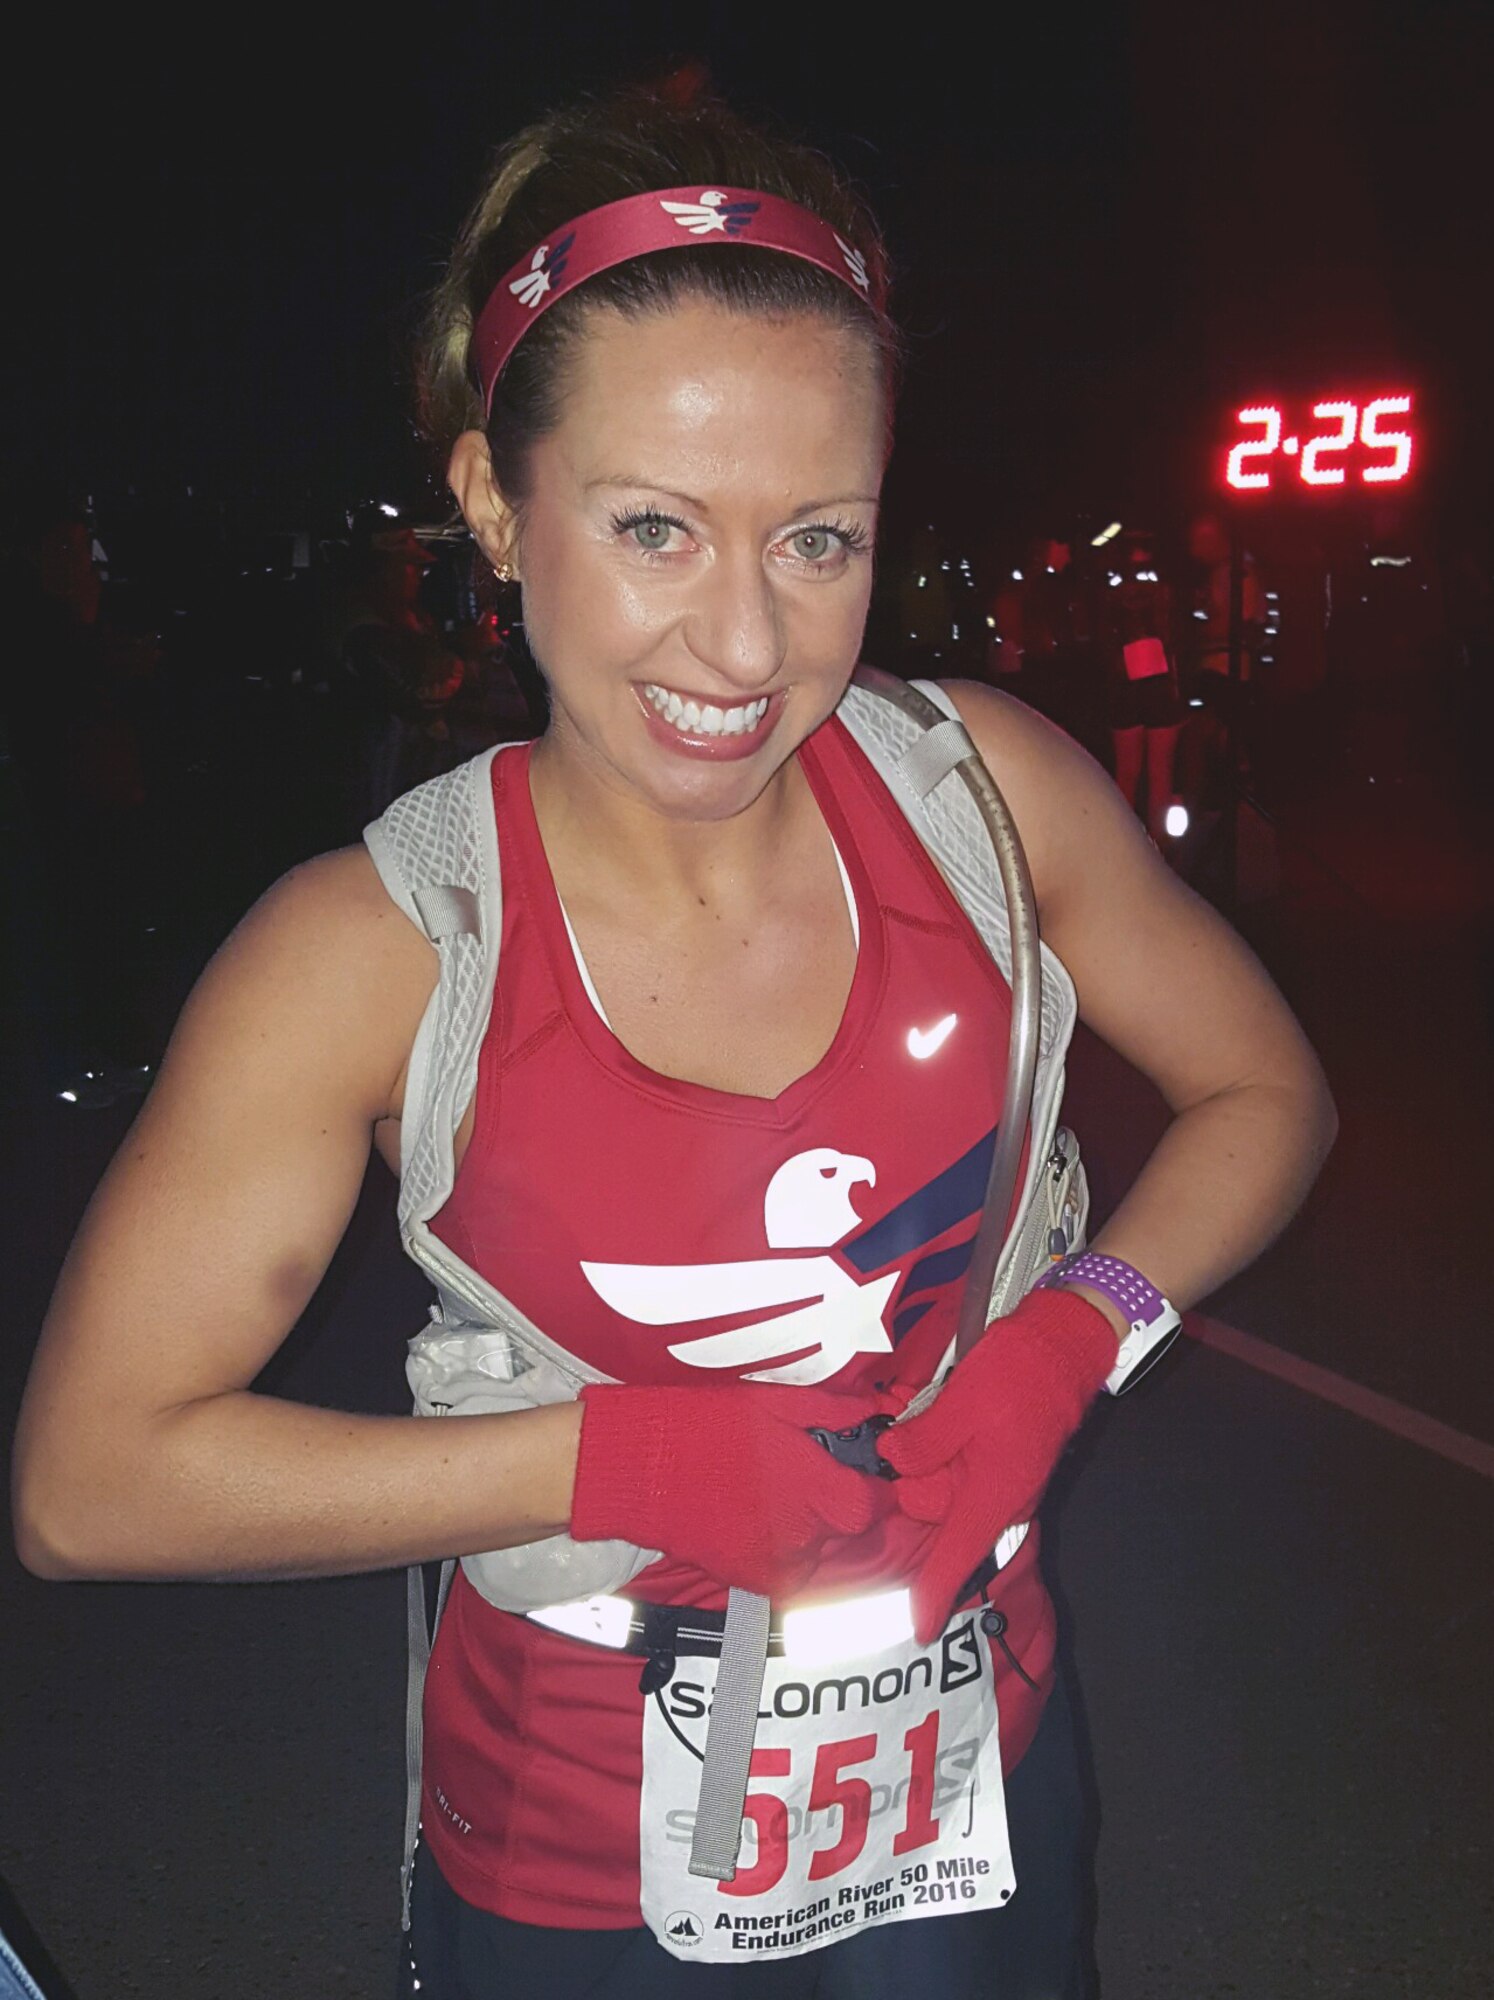 Master Sgt. Krystalore Stegner, the recruiting and rentention manger for the 107th Airlift Wing at Niagara Falls Air Reserve Station, N.Y., competes in her first 50 mile ultra-marathon at Folsom Lake, California, April 2, 2016. Out of 65 international applicants, Stegner was chosen as one of two people to receive training from champion ultra-marathon runners for six months leading up to the race, which is featured as part of the Becoming Ultra Project. (Photos courtesy of Master Sgt. Krystalore Stegner)